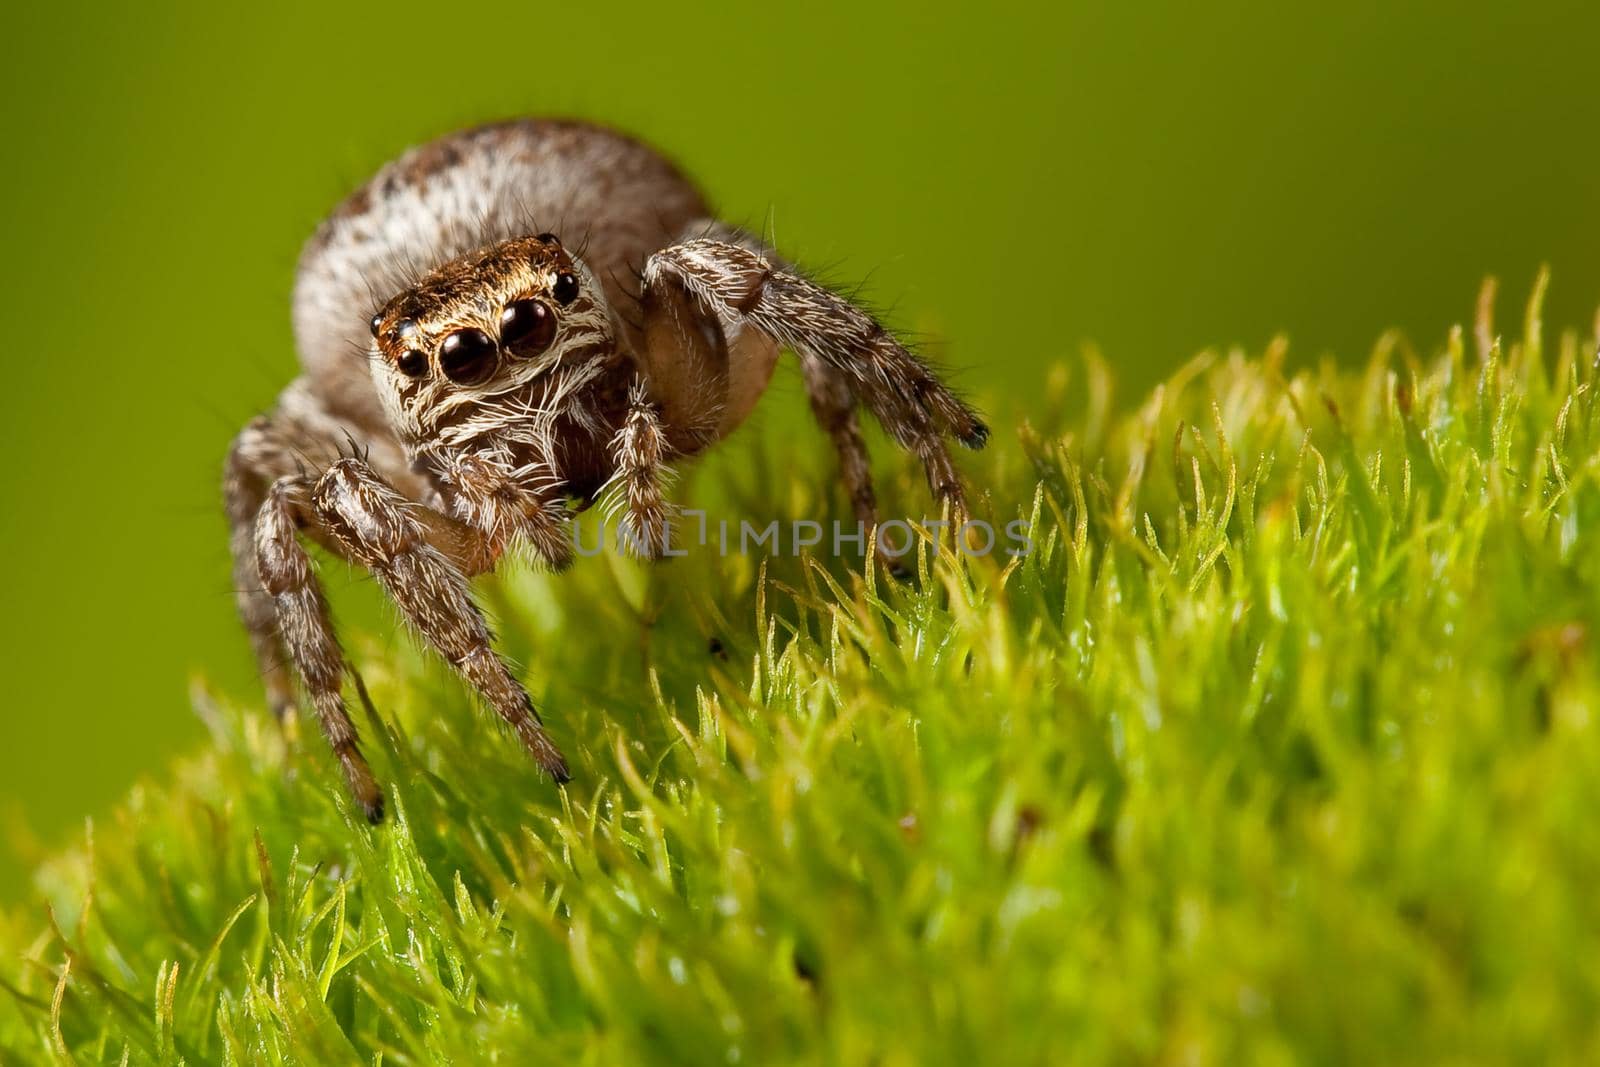 Jumping spider walk in the grass by Lincikas